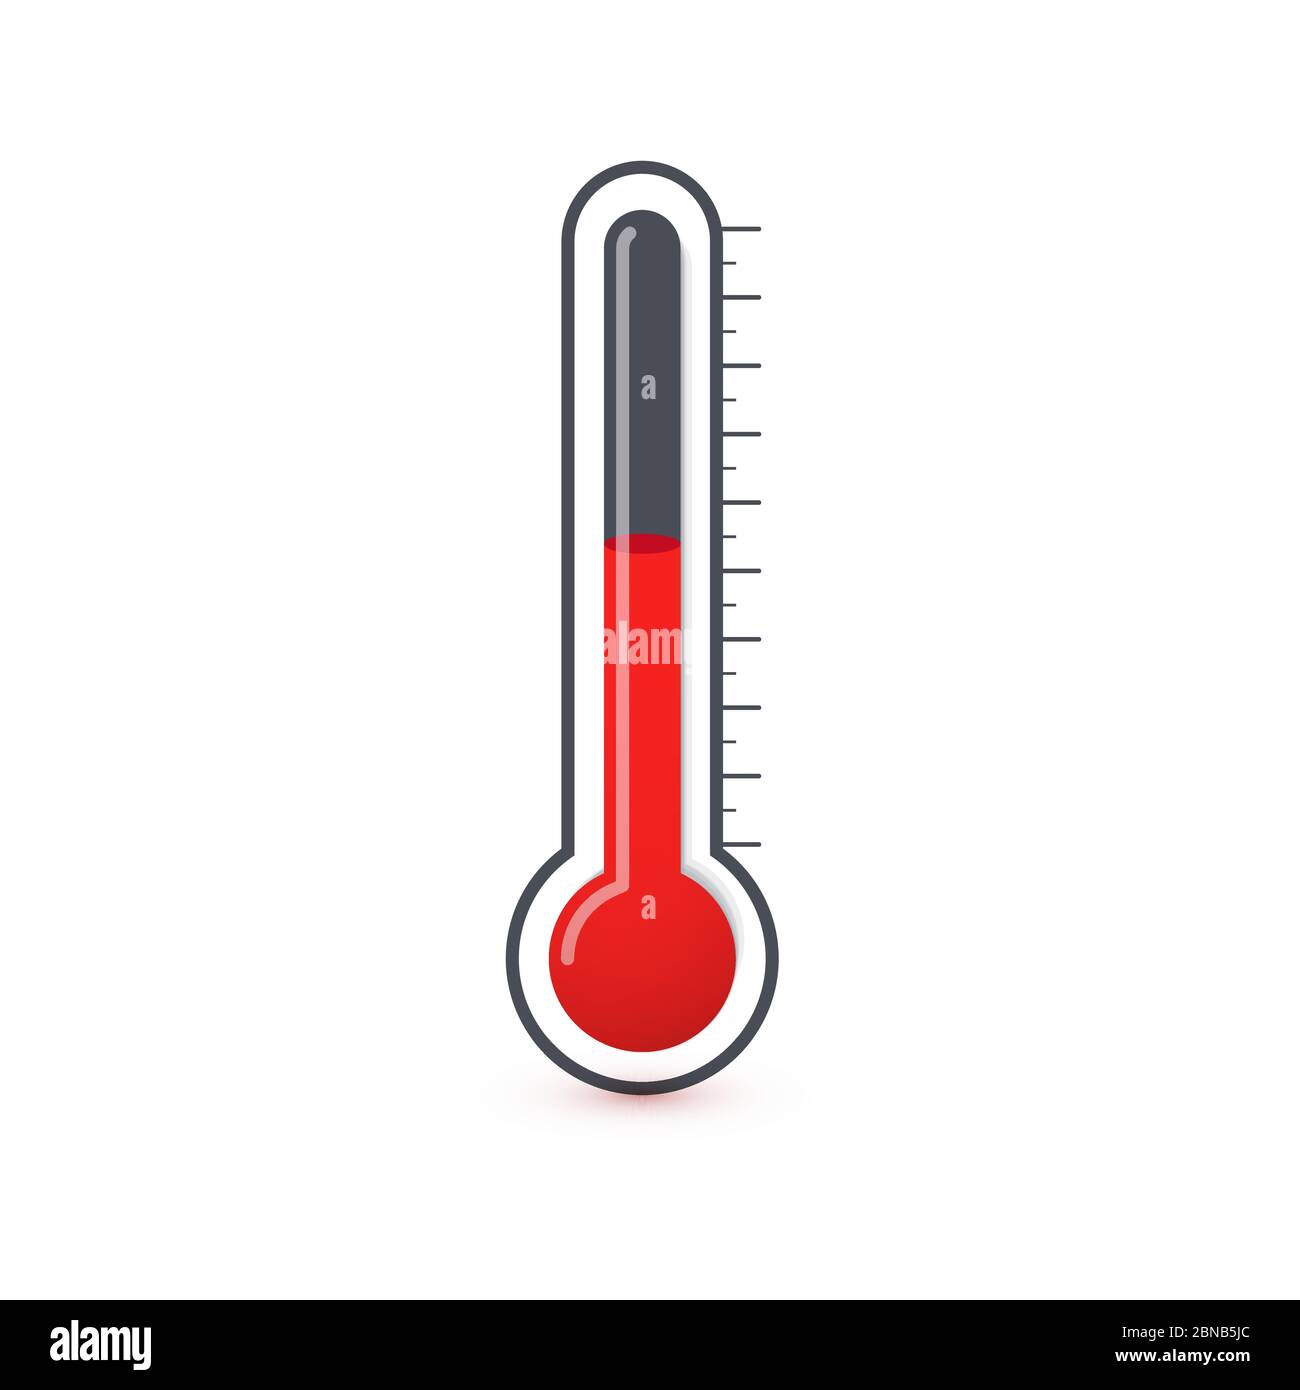 https://c8.alamy.com/comp/2BNB5JC/thermometer-icon-glass-bulb-with-mercury-measuring-instrument-for-air-temperature-and-body-temperature-isolated-vector-symbol-on-a-white-background-2BNB5JC.jpg